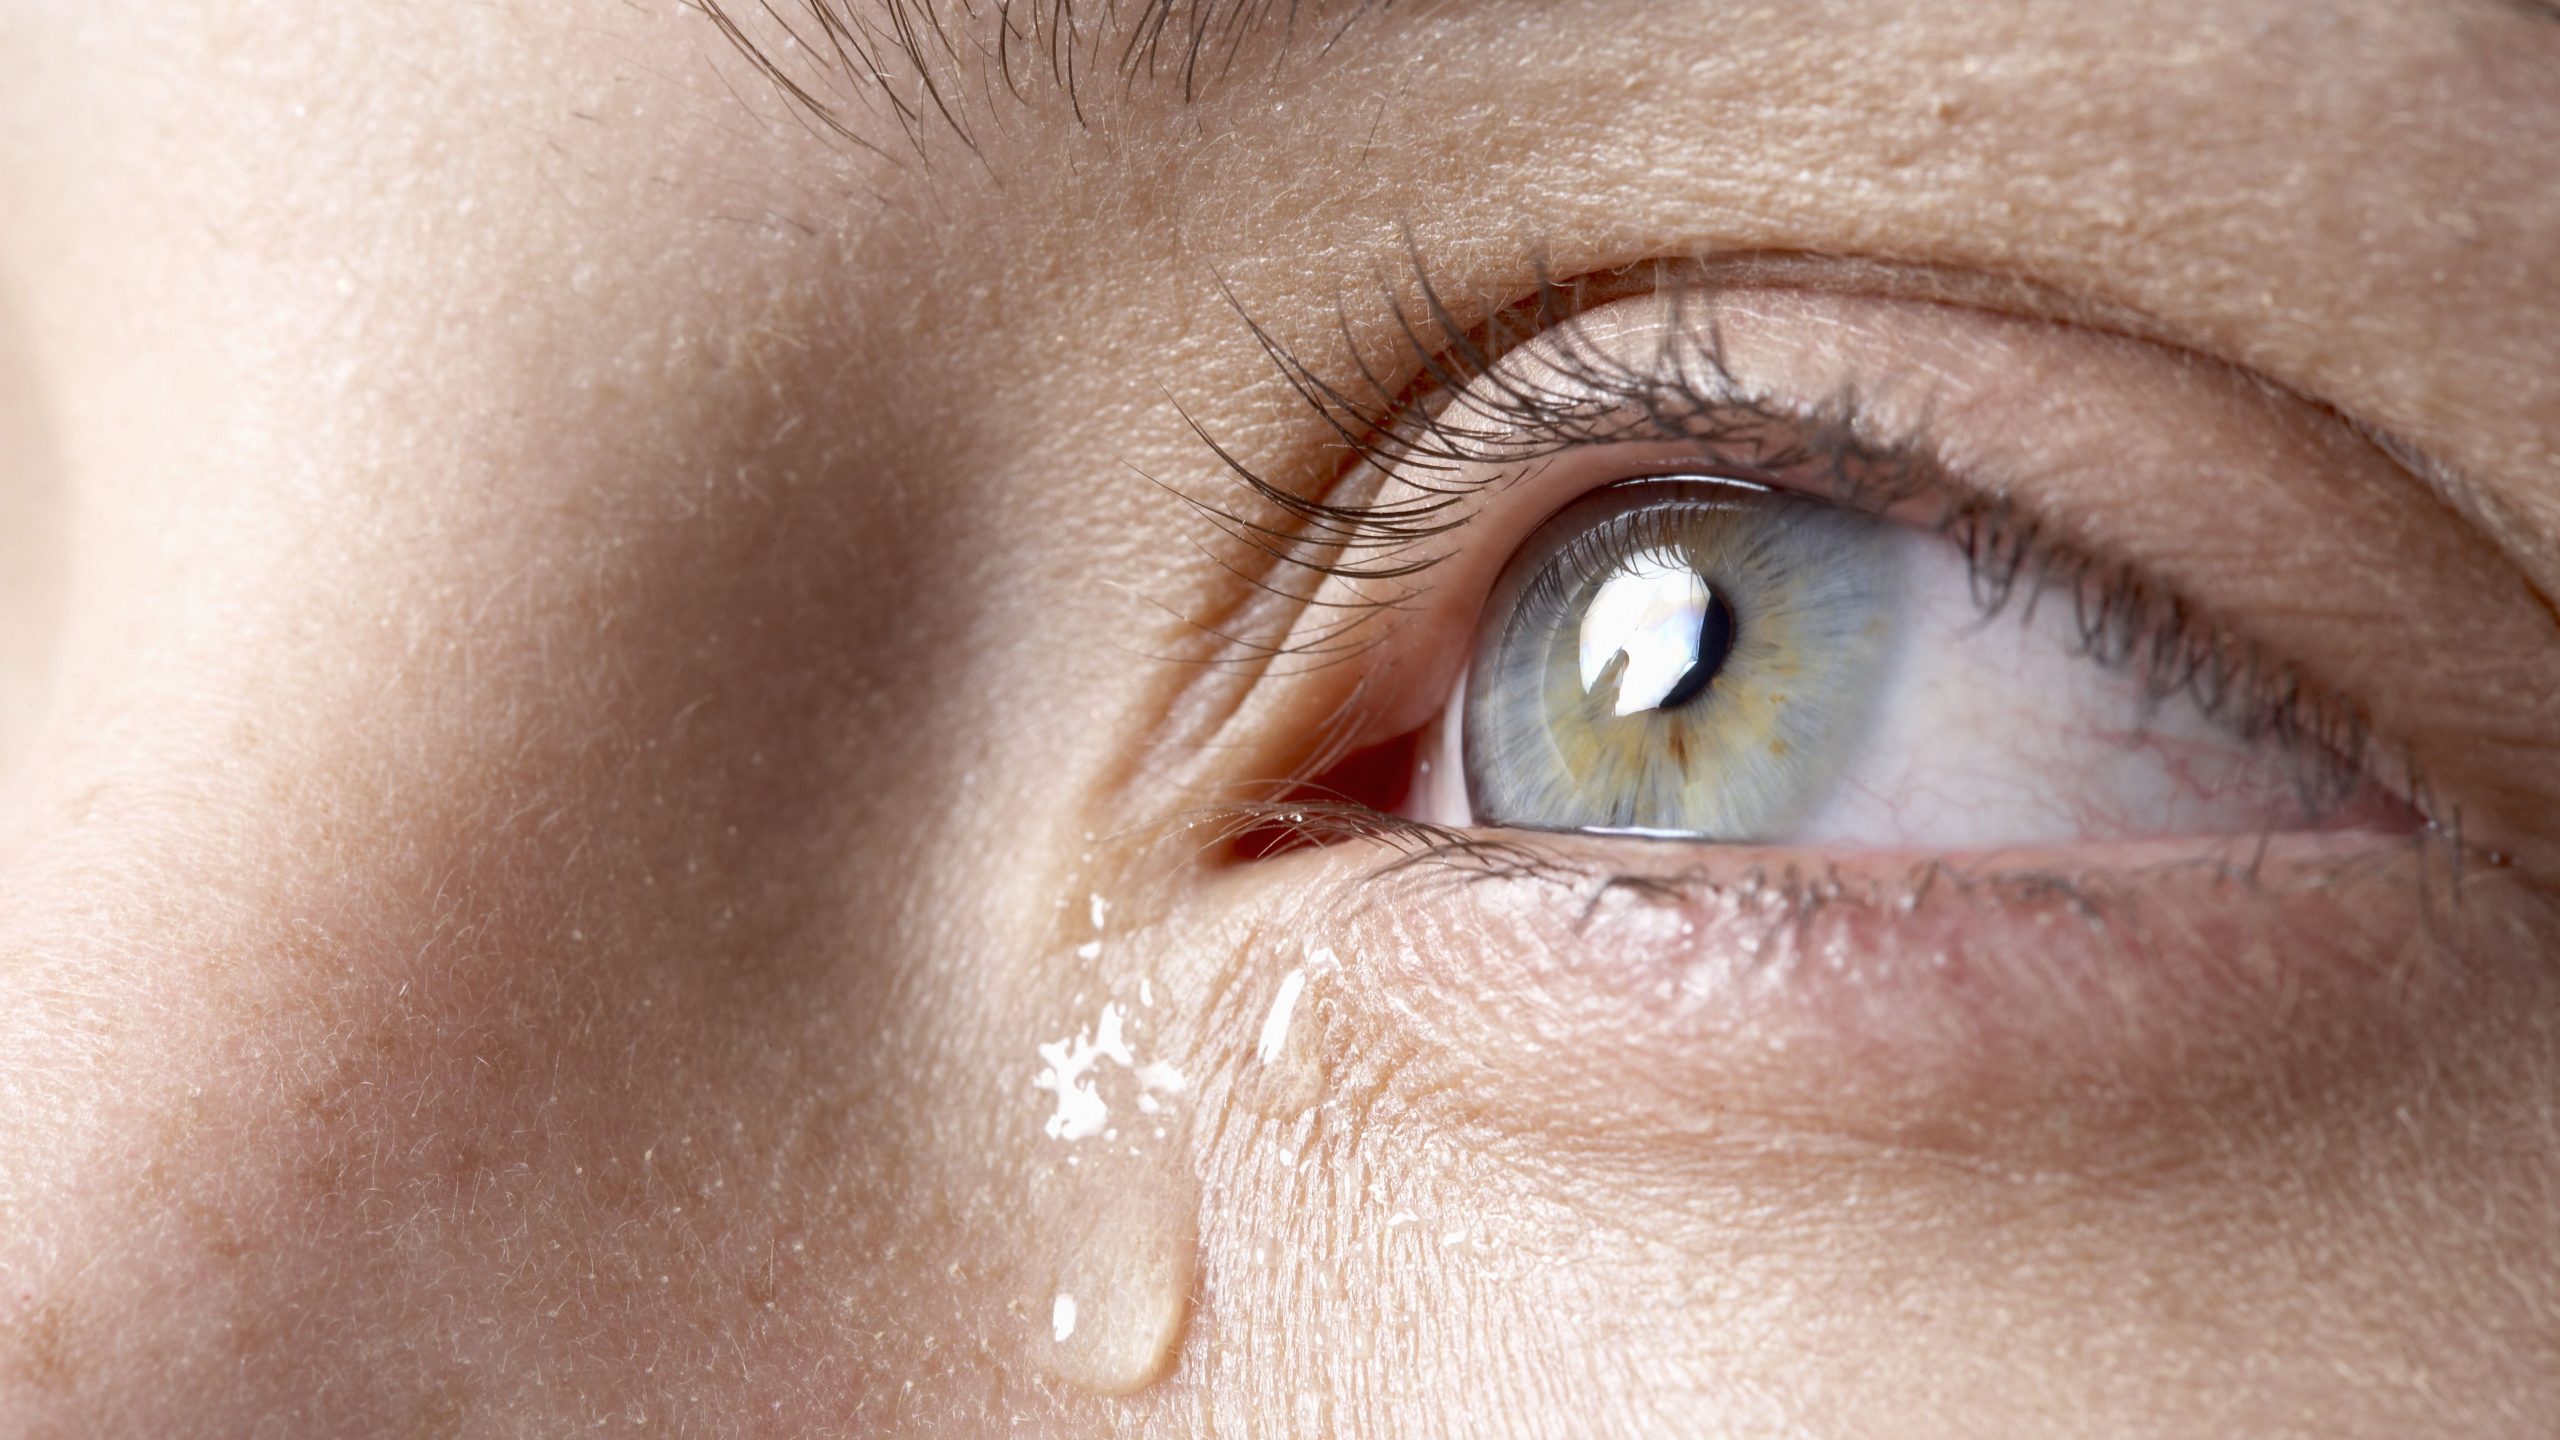  All Eye Problems To Check this Homemade  Eye Drops: 